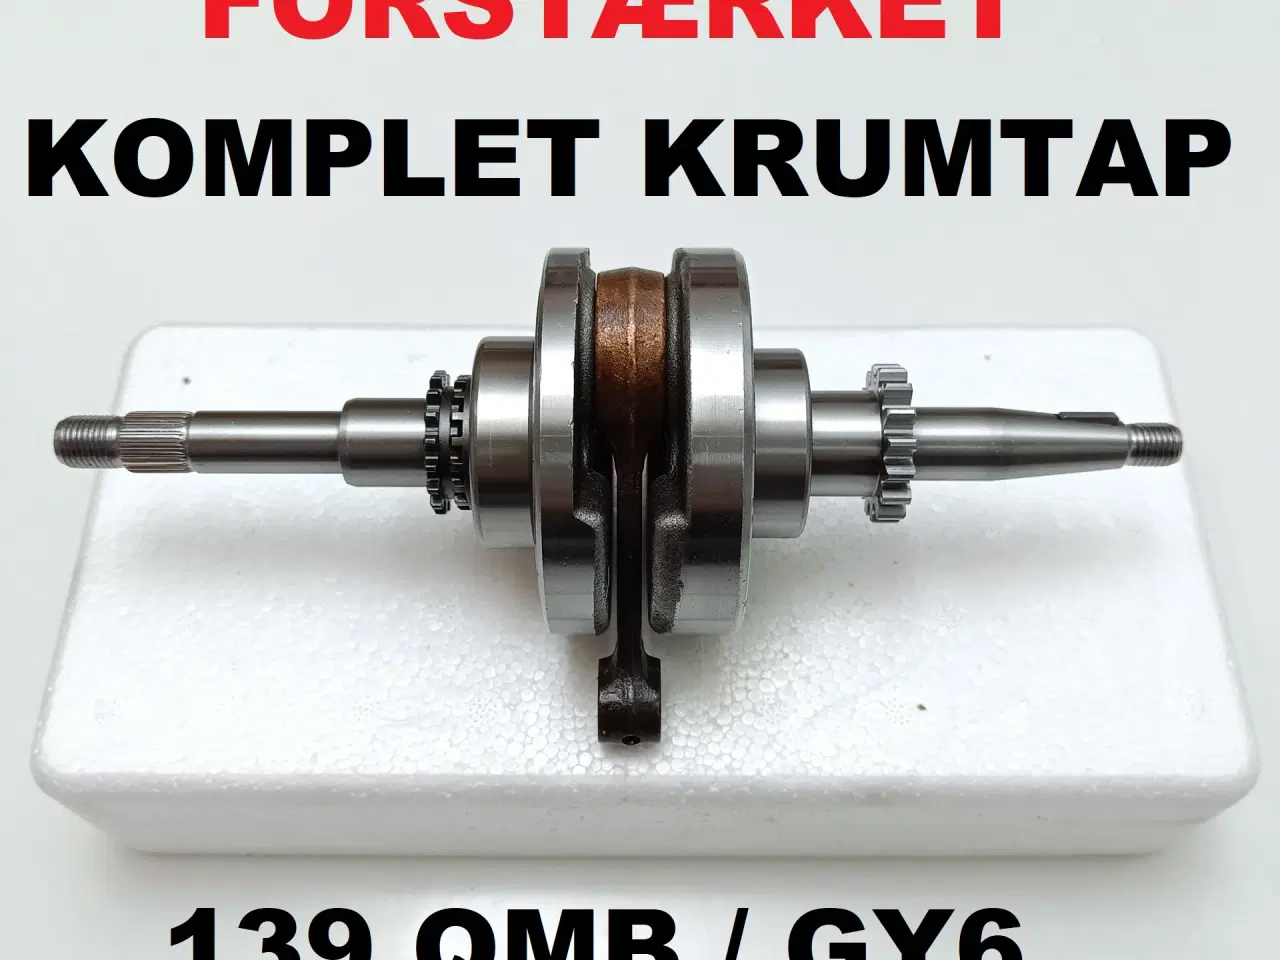 Billede 1 - NY! Tuning Krumtap 139 QMB – GY6